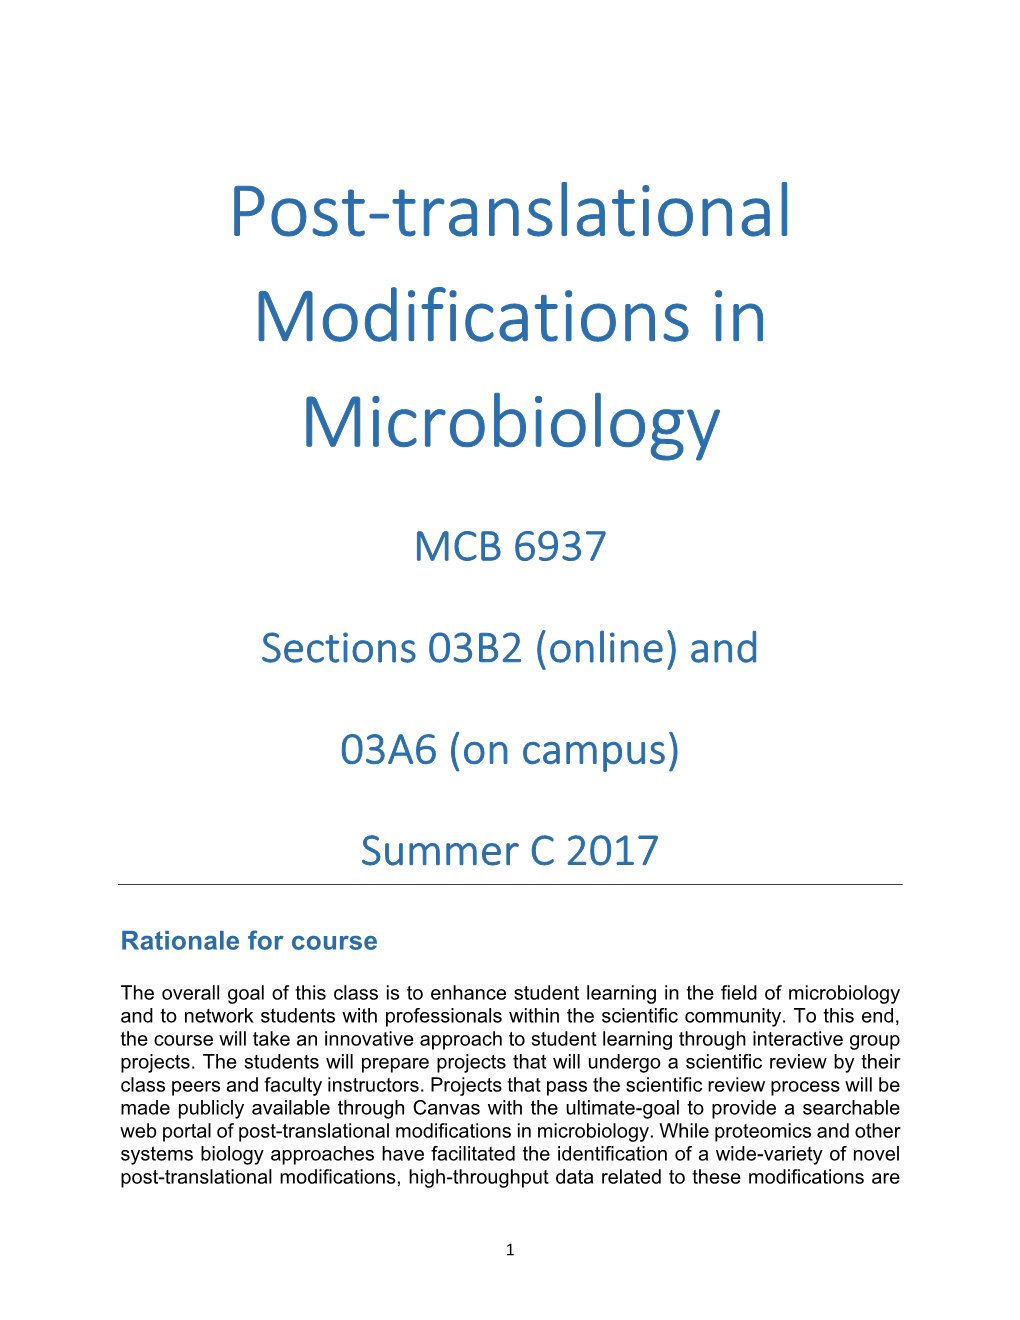 Post-Translational Modifications in Microbiology